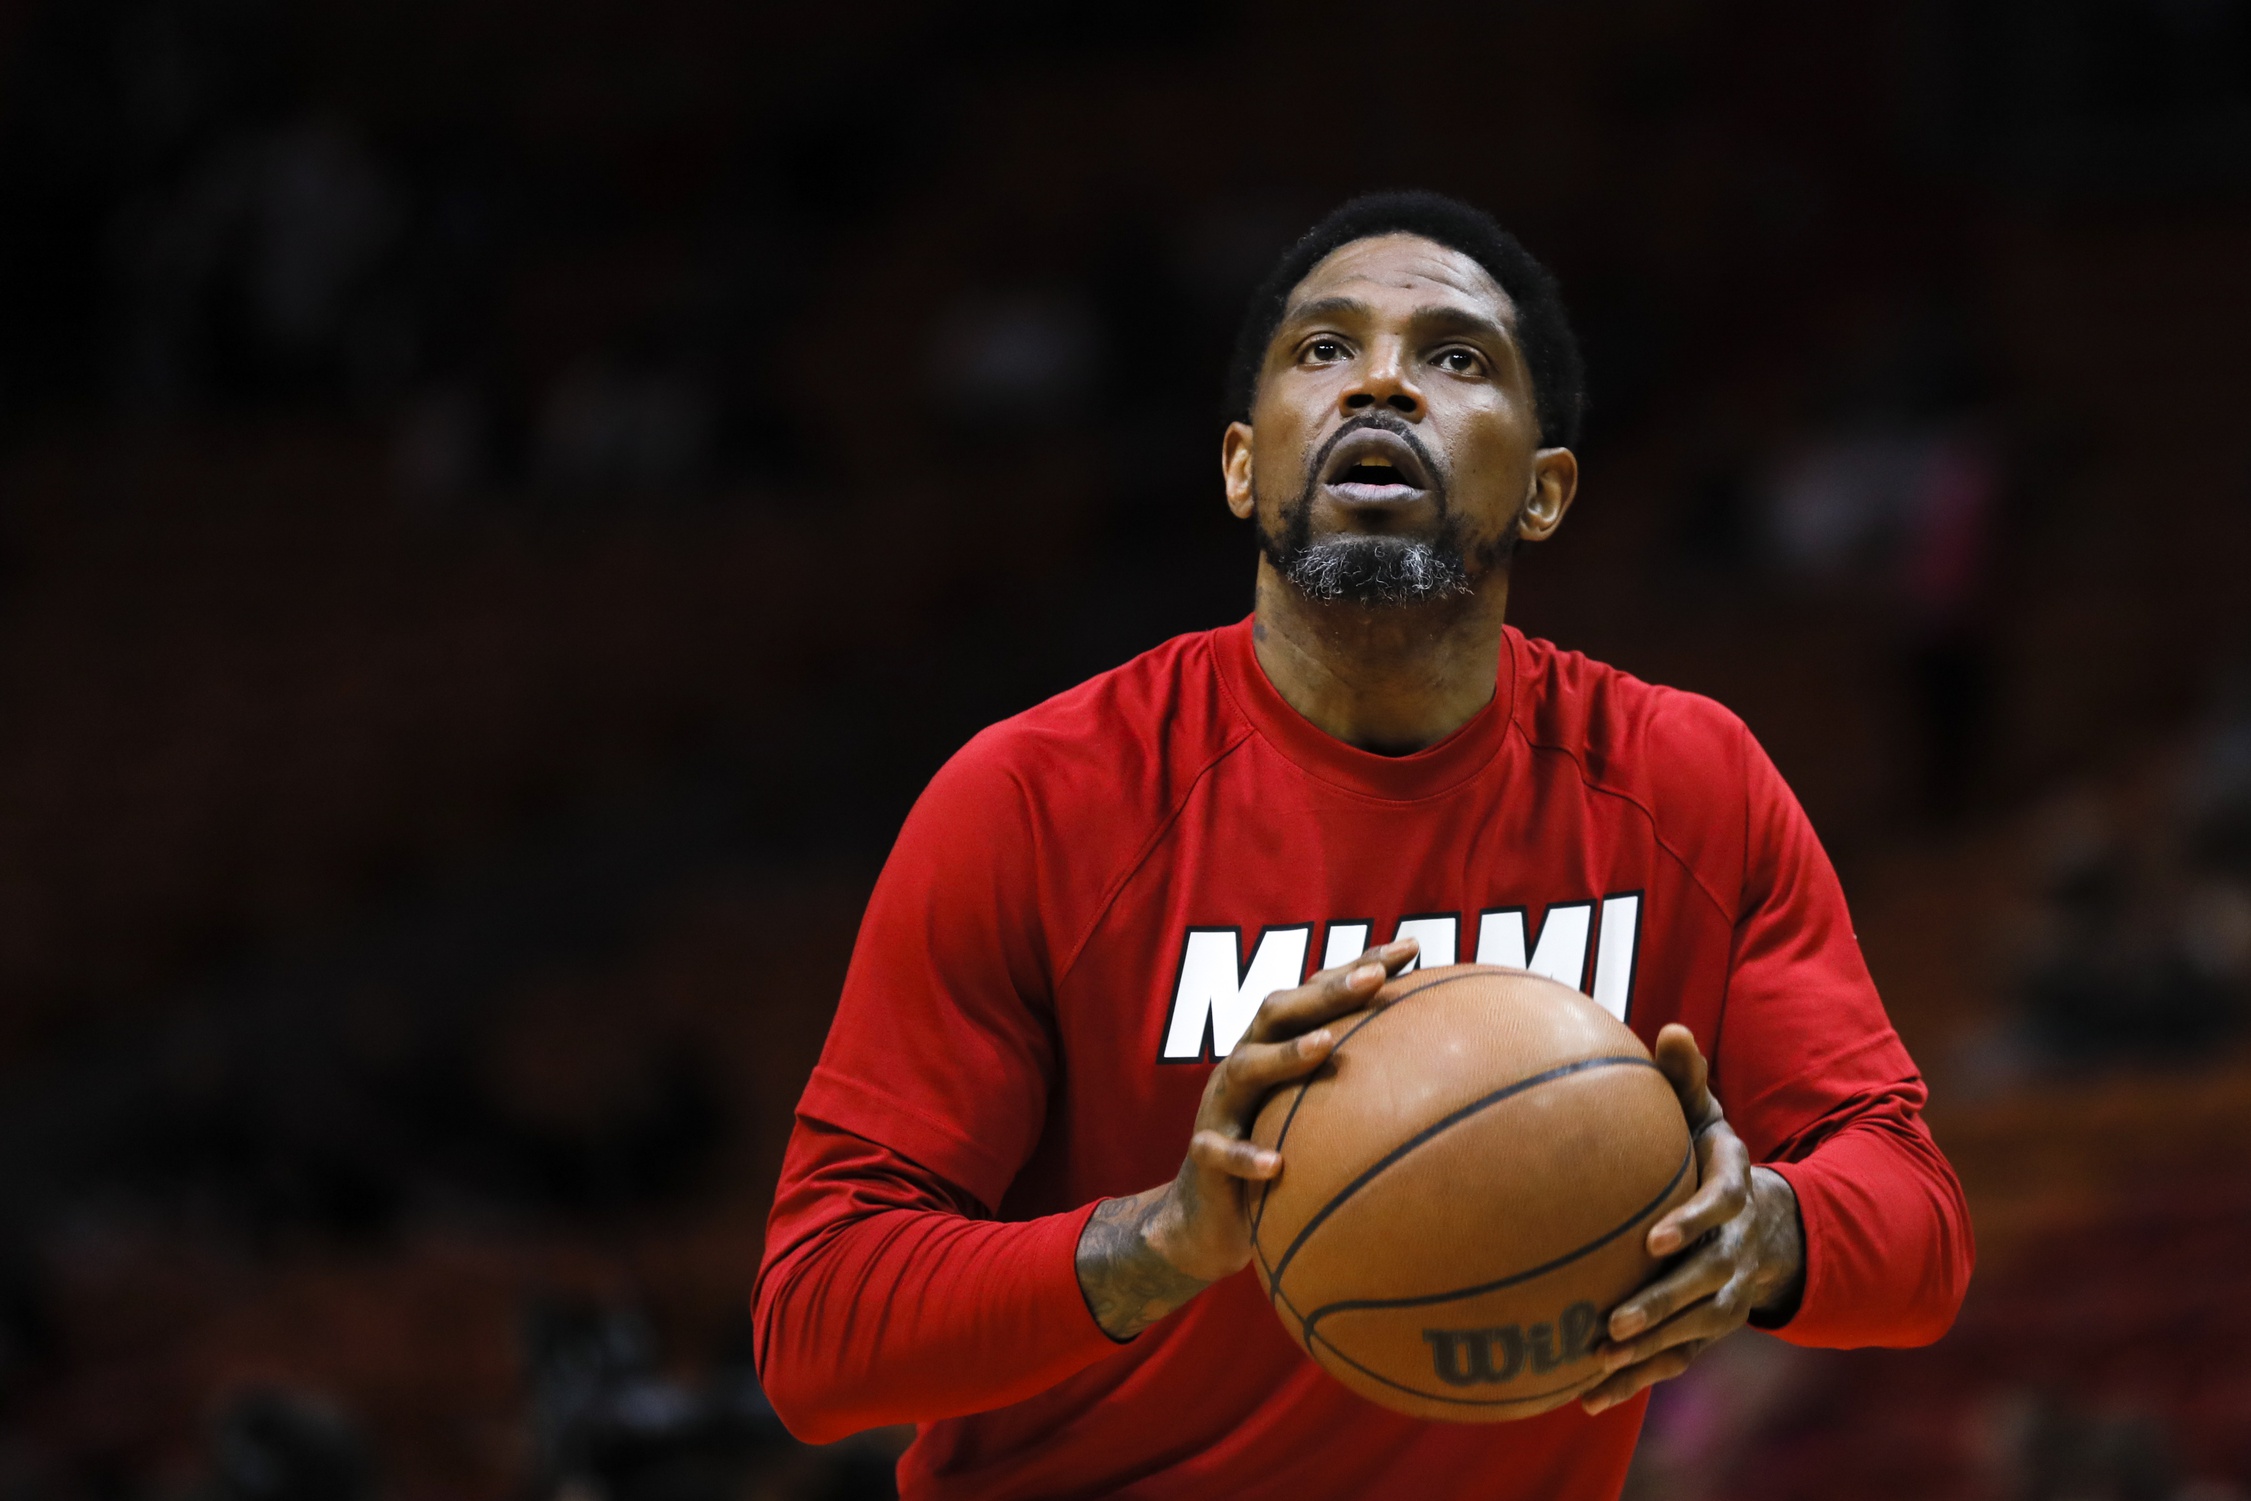 Udonis Haslem reflects on bond, contributions made for Heat 